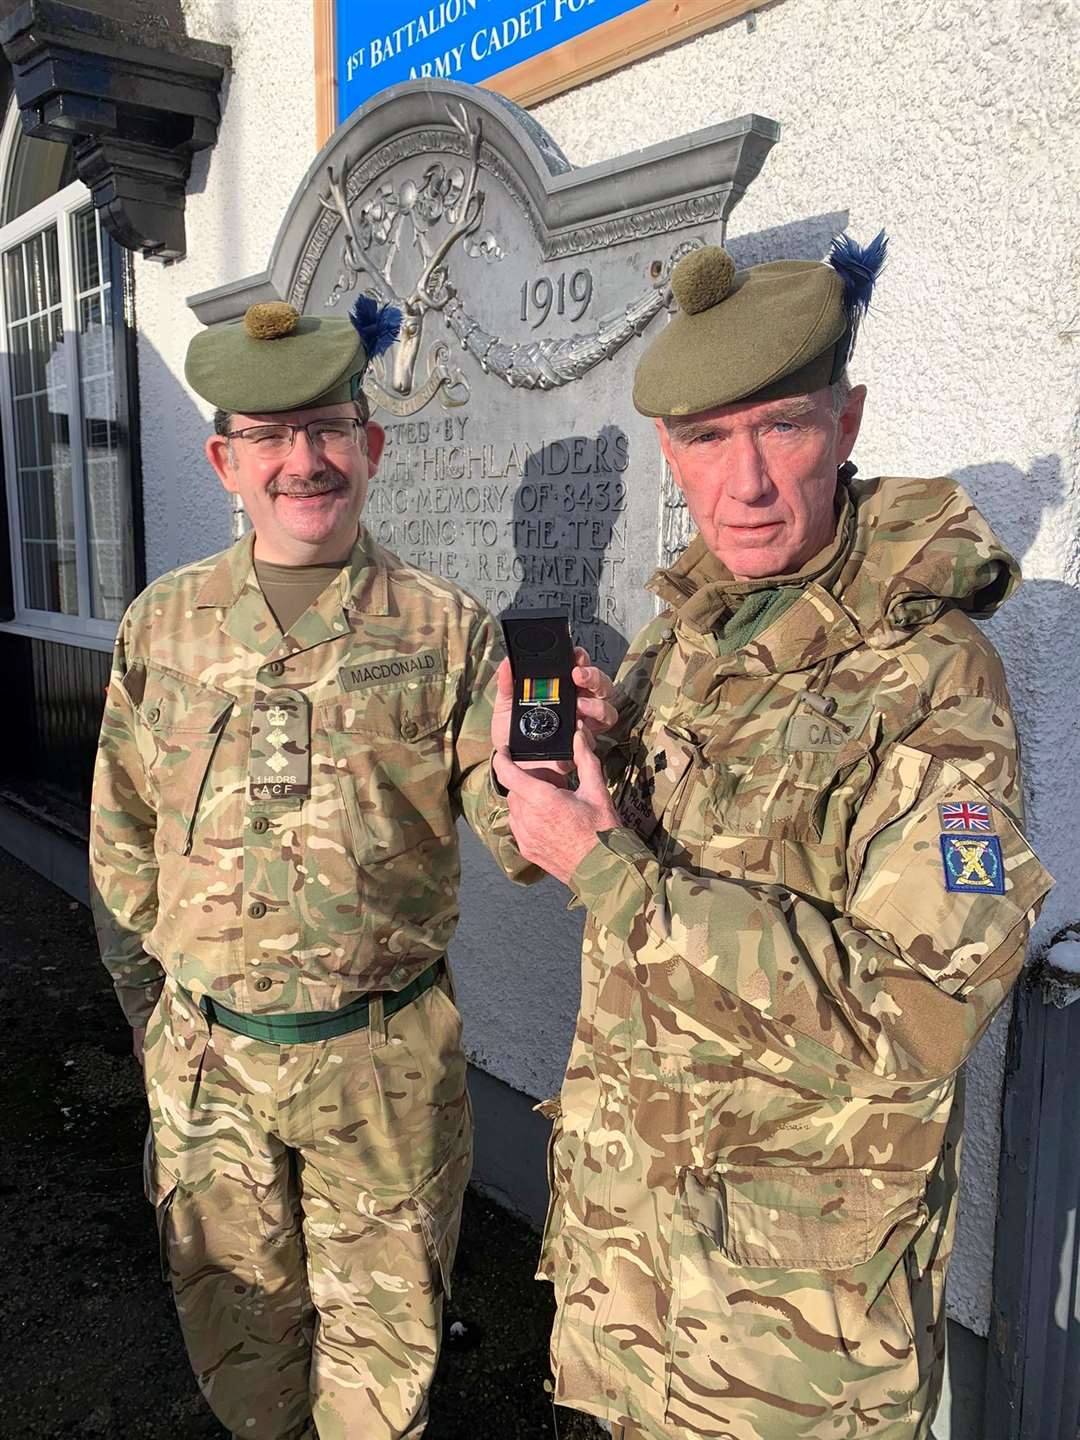 Lt Cassidy (right) receiving the Cadet Force Medal by the Battalion's Commandant Col MacDonald.